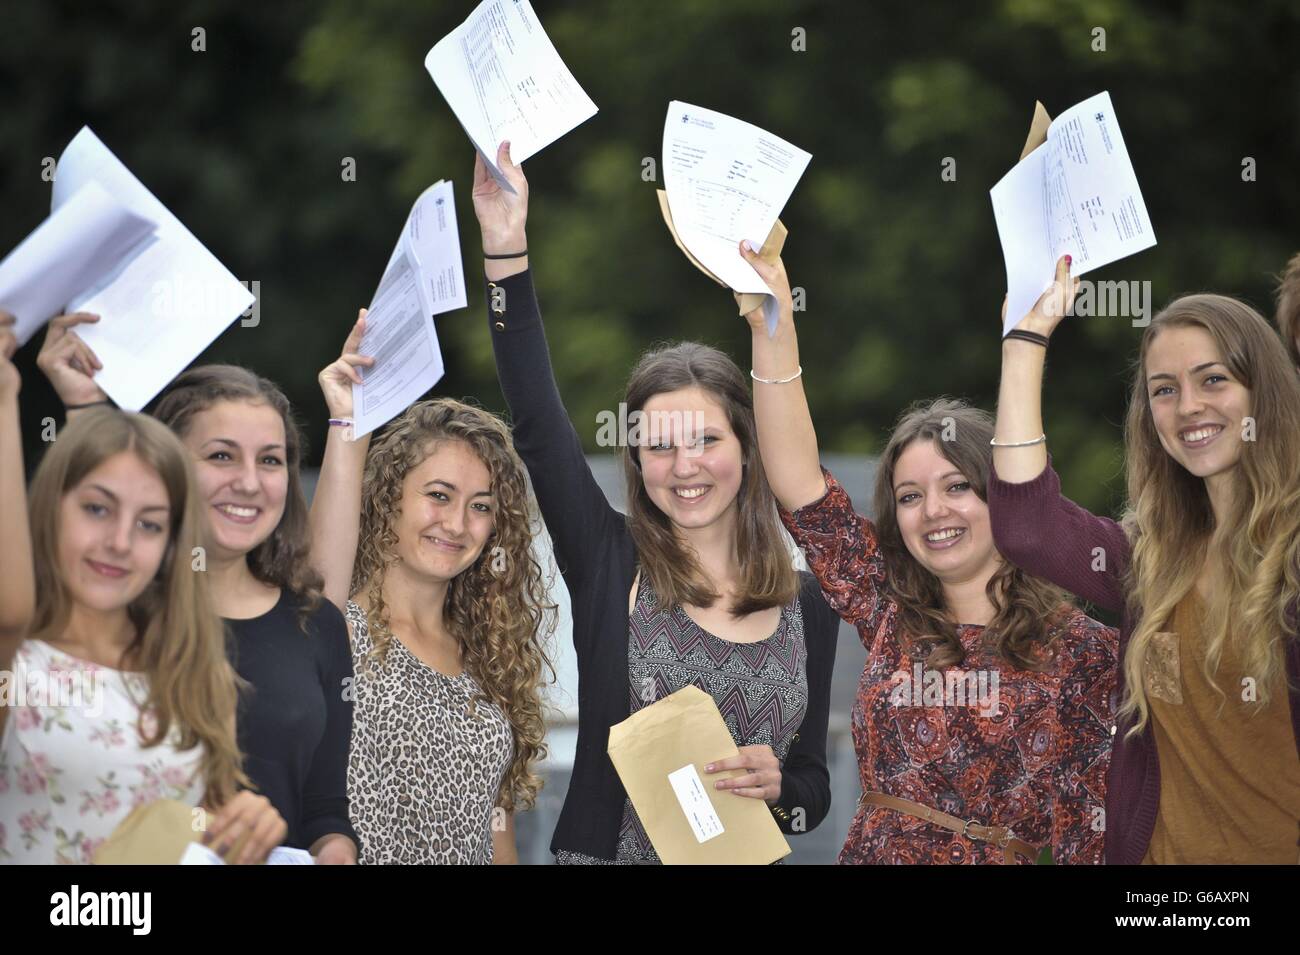 Top achieving A* students at St Mary Redcliffe and Temple School pupils wave their their A-Level results in the air. Stock Photo